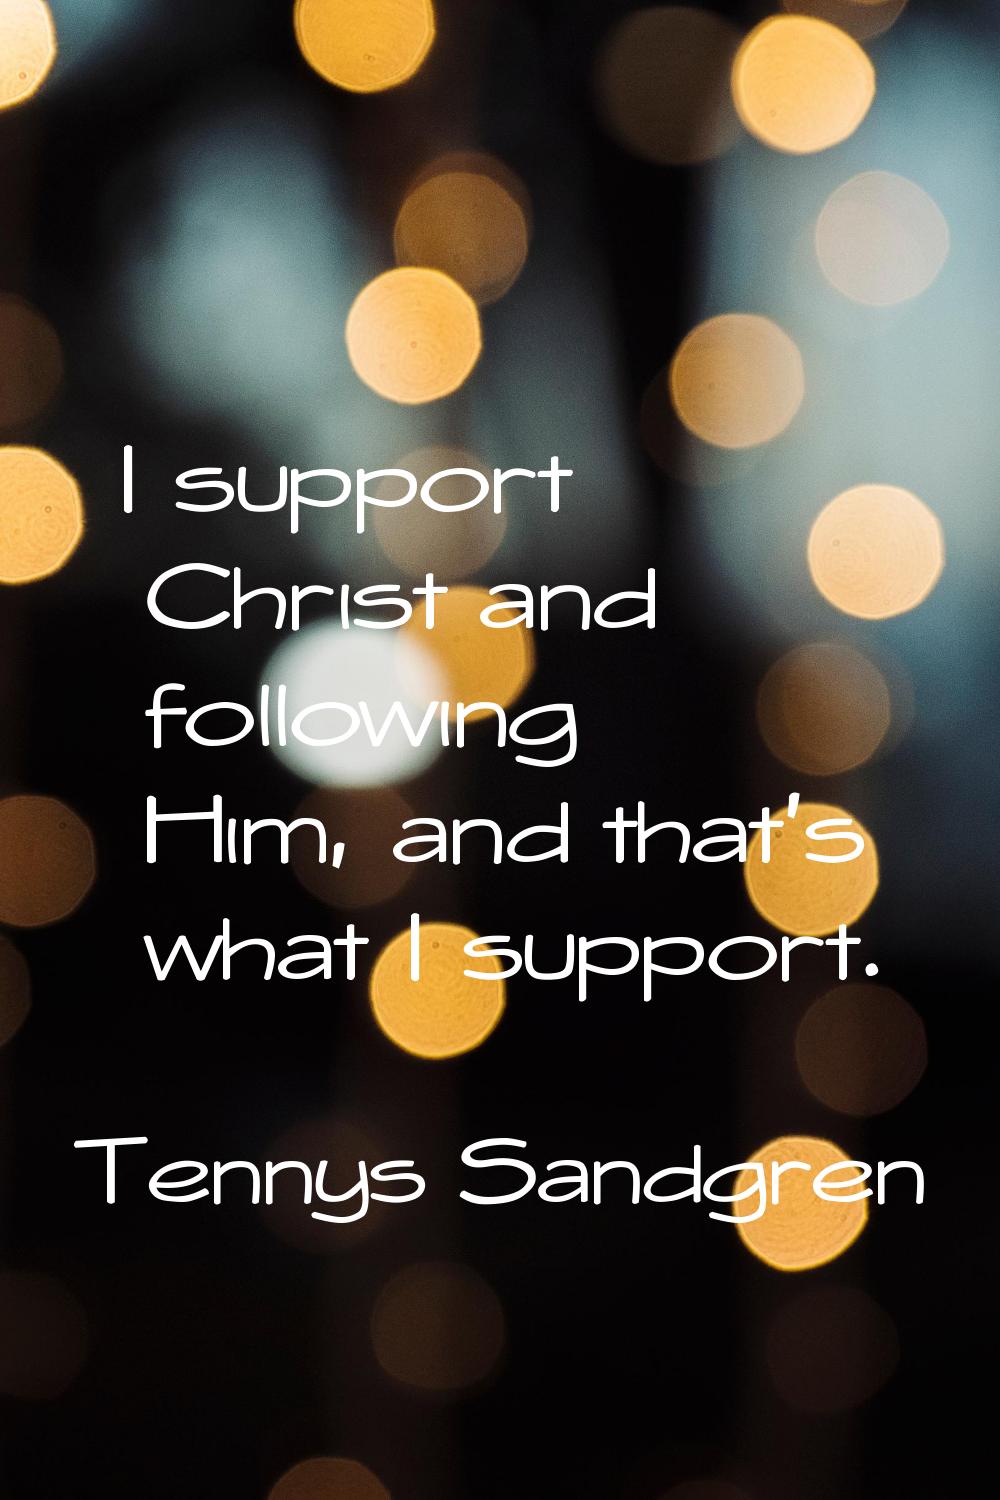 I support Christ and following Him, and that's what I support.